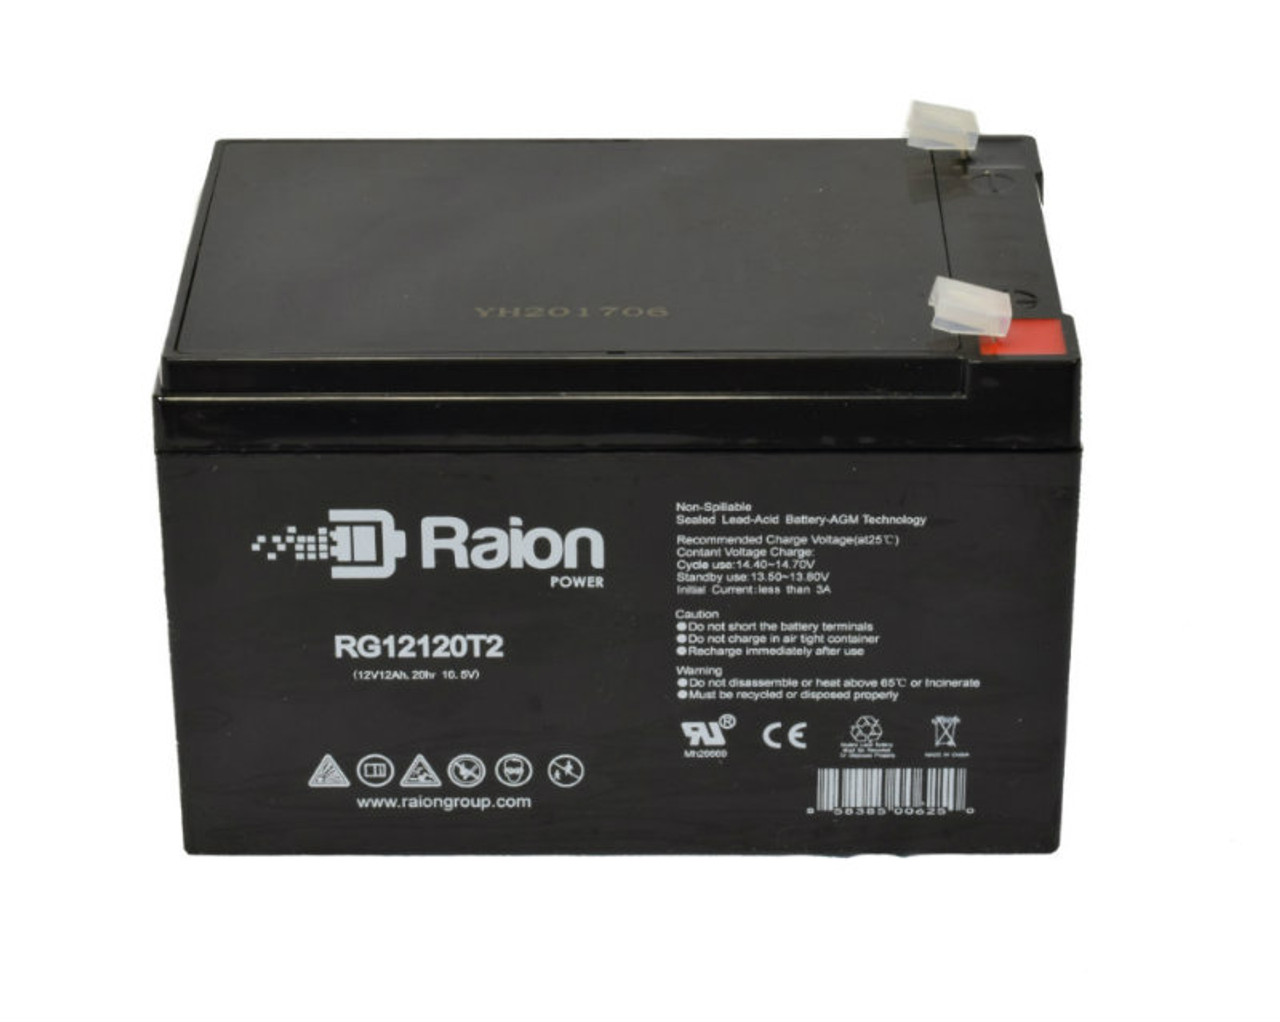 Raion Power RG12120T2 SLA Battery for Zip'r Mobility 3-Wheel Xtra Hybrid Travel Scooter Wheelchairs